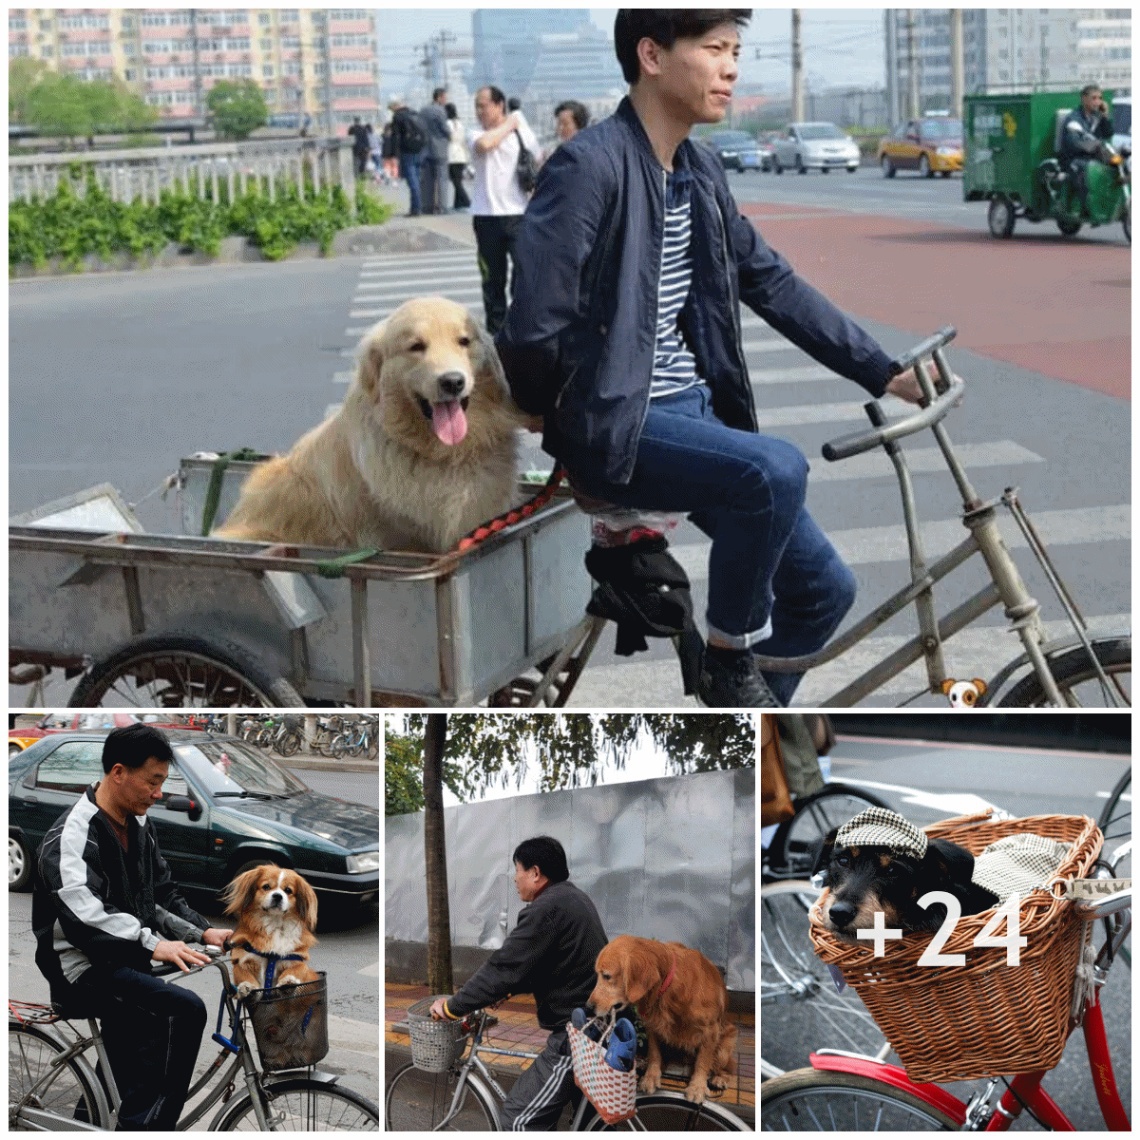 Every day accompanying his owner to the market, the adorable dog makes the online community love him.